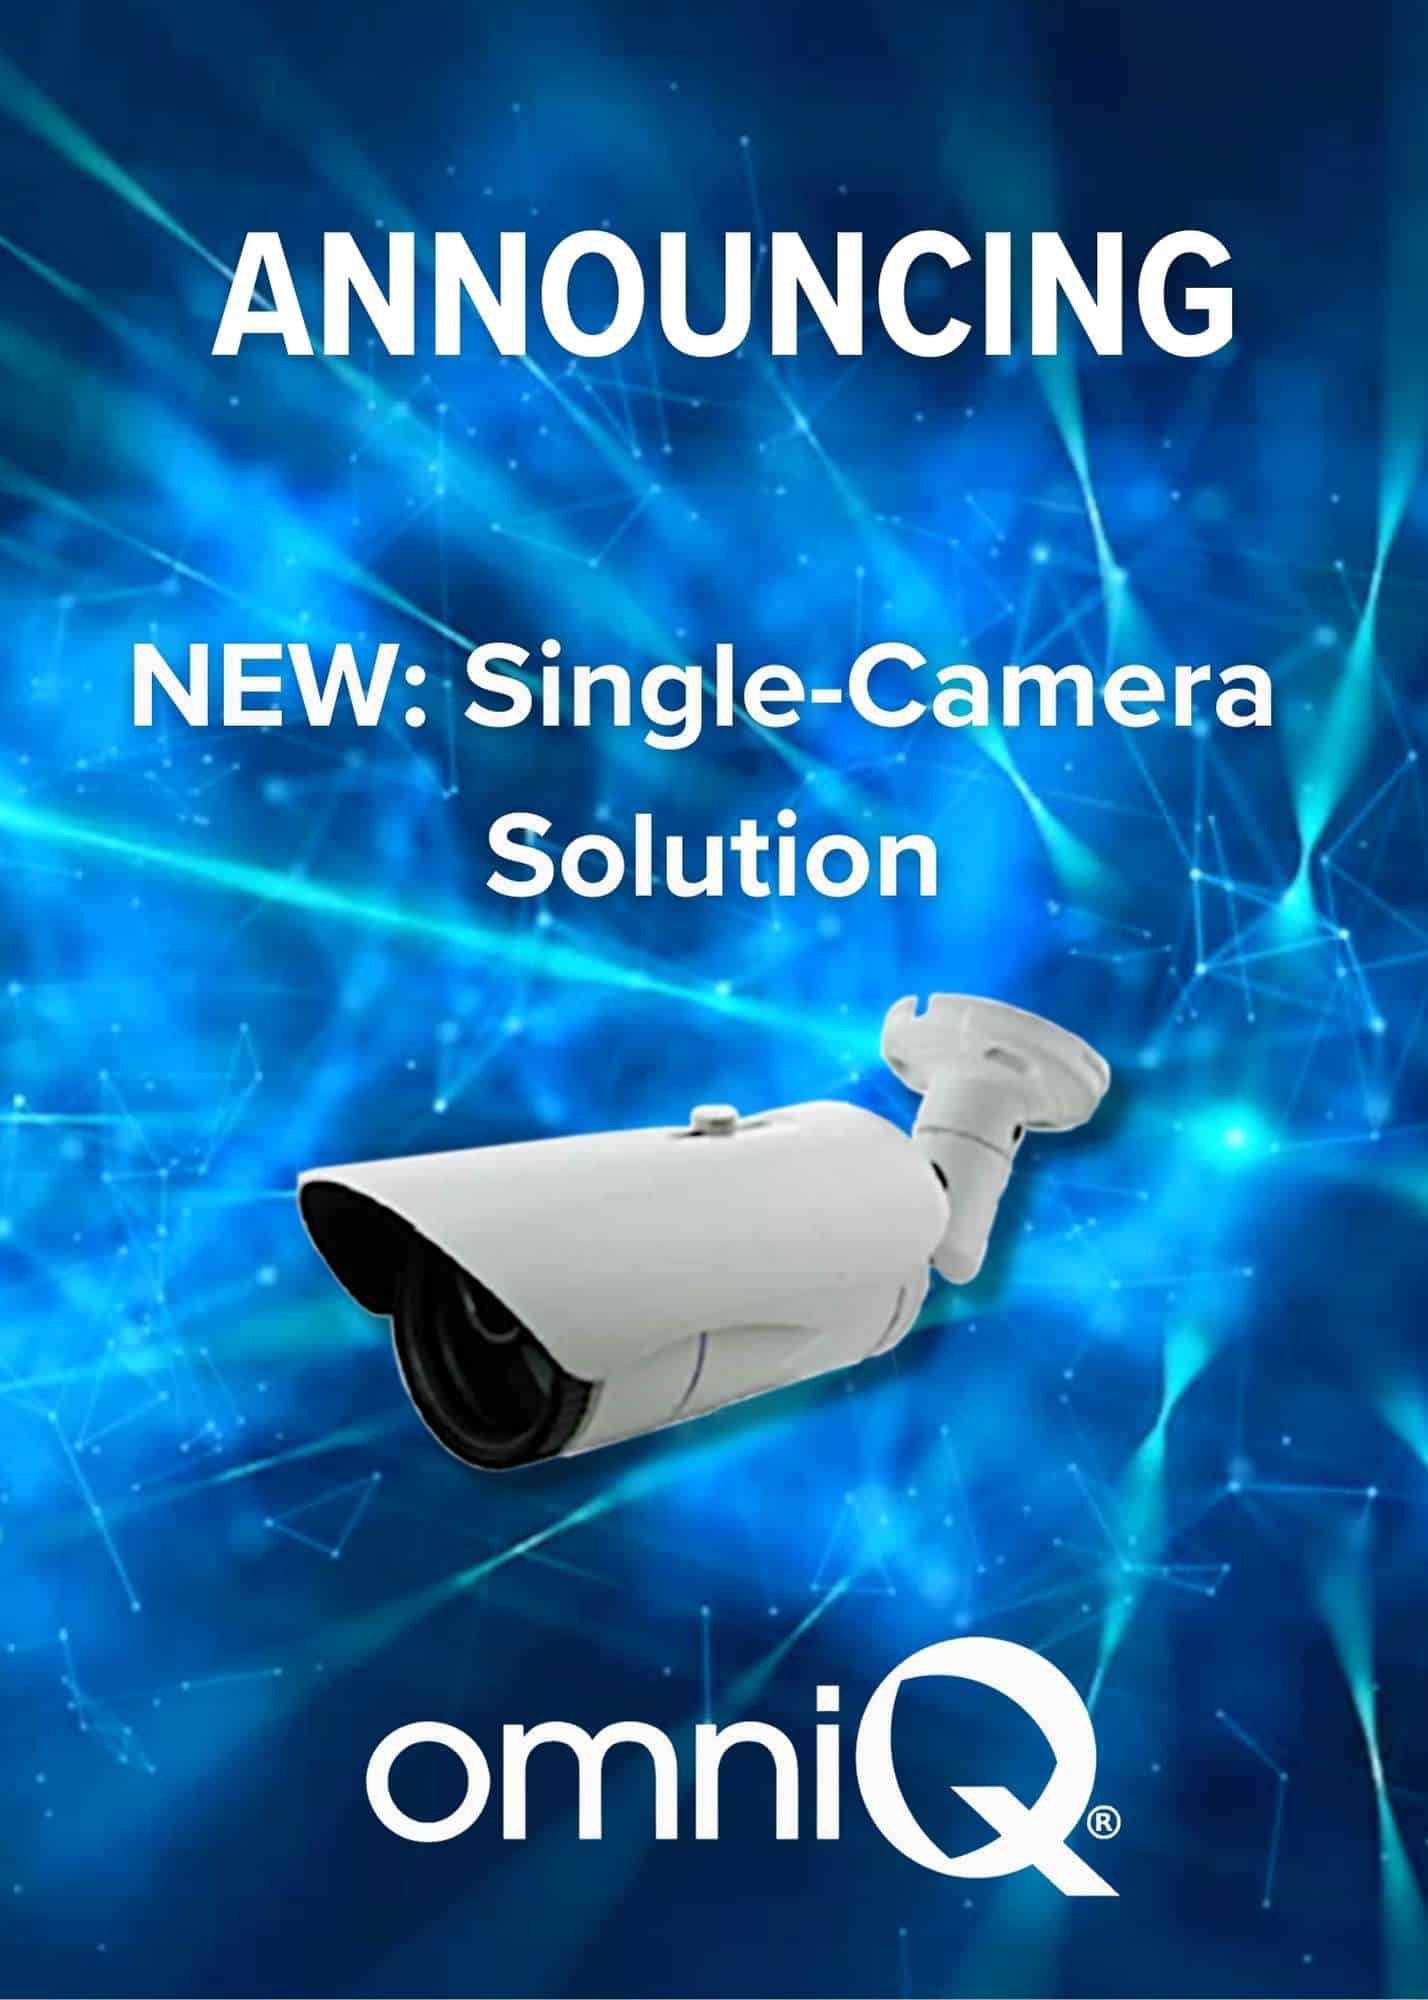 Image of camera with text.